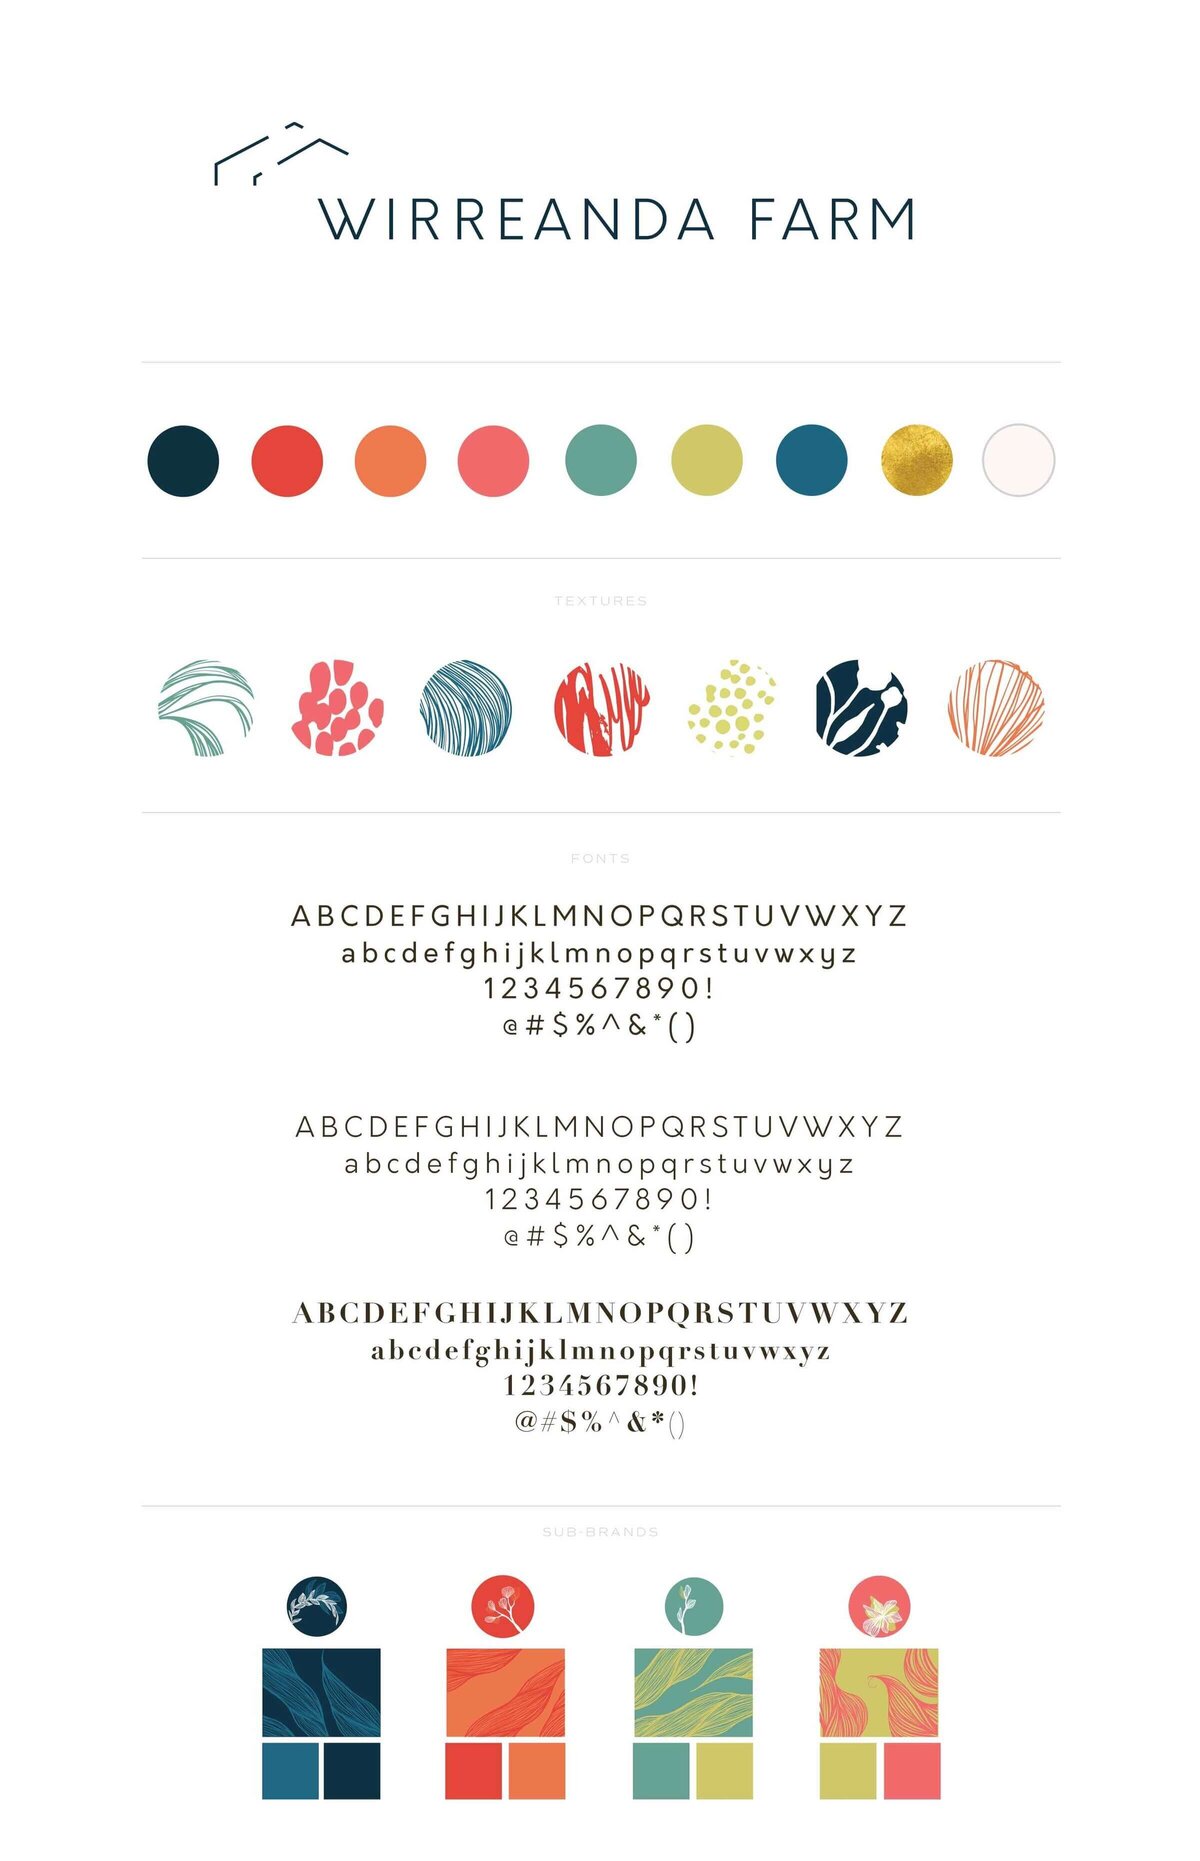 Wirreanda Farm brand gudielines, bright and colourful colour palette abstract textures and minimalist fonts